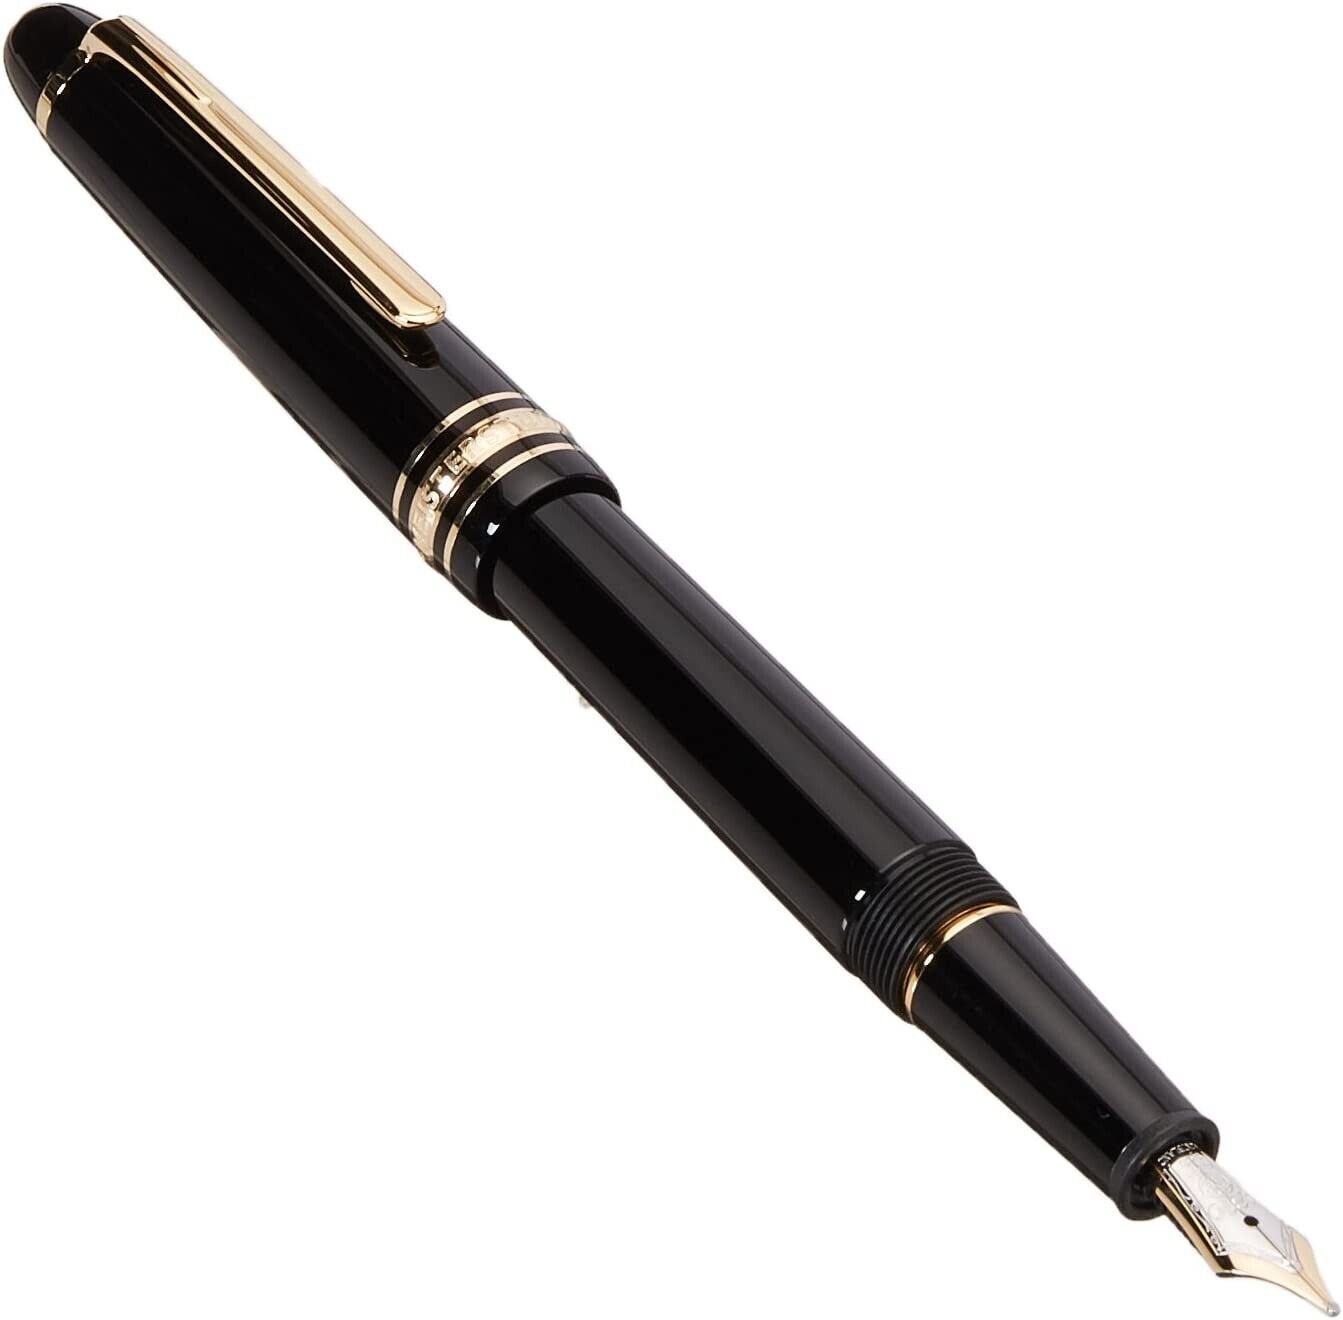 NEW MONTBLANC MEISTERSTUCK 145 FOUNTAIN PEN IN BLACK GOLD  M Nib Brand Outlet